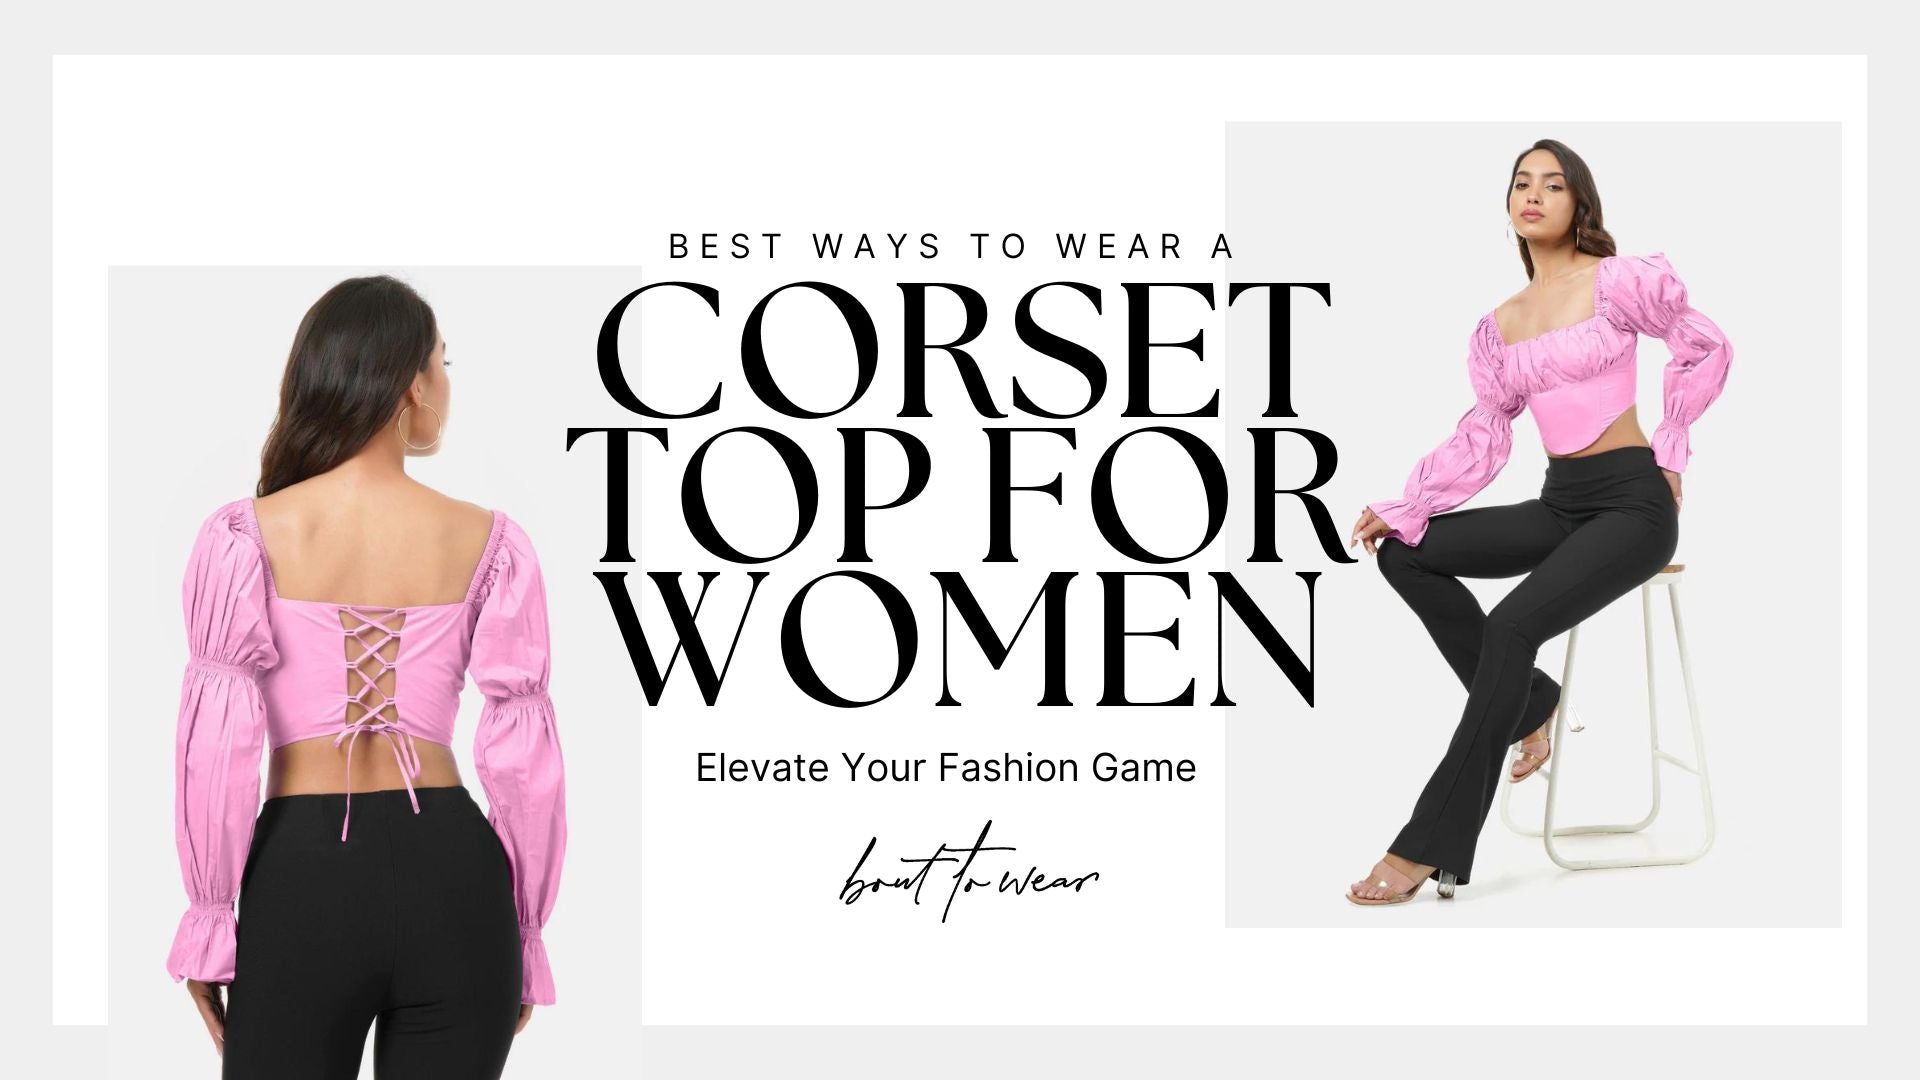 The Best Ways to Wear a Corset Top For Women: Elevate Your Fashion Game